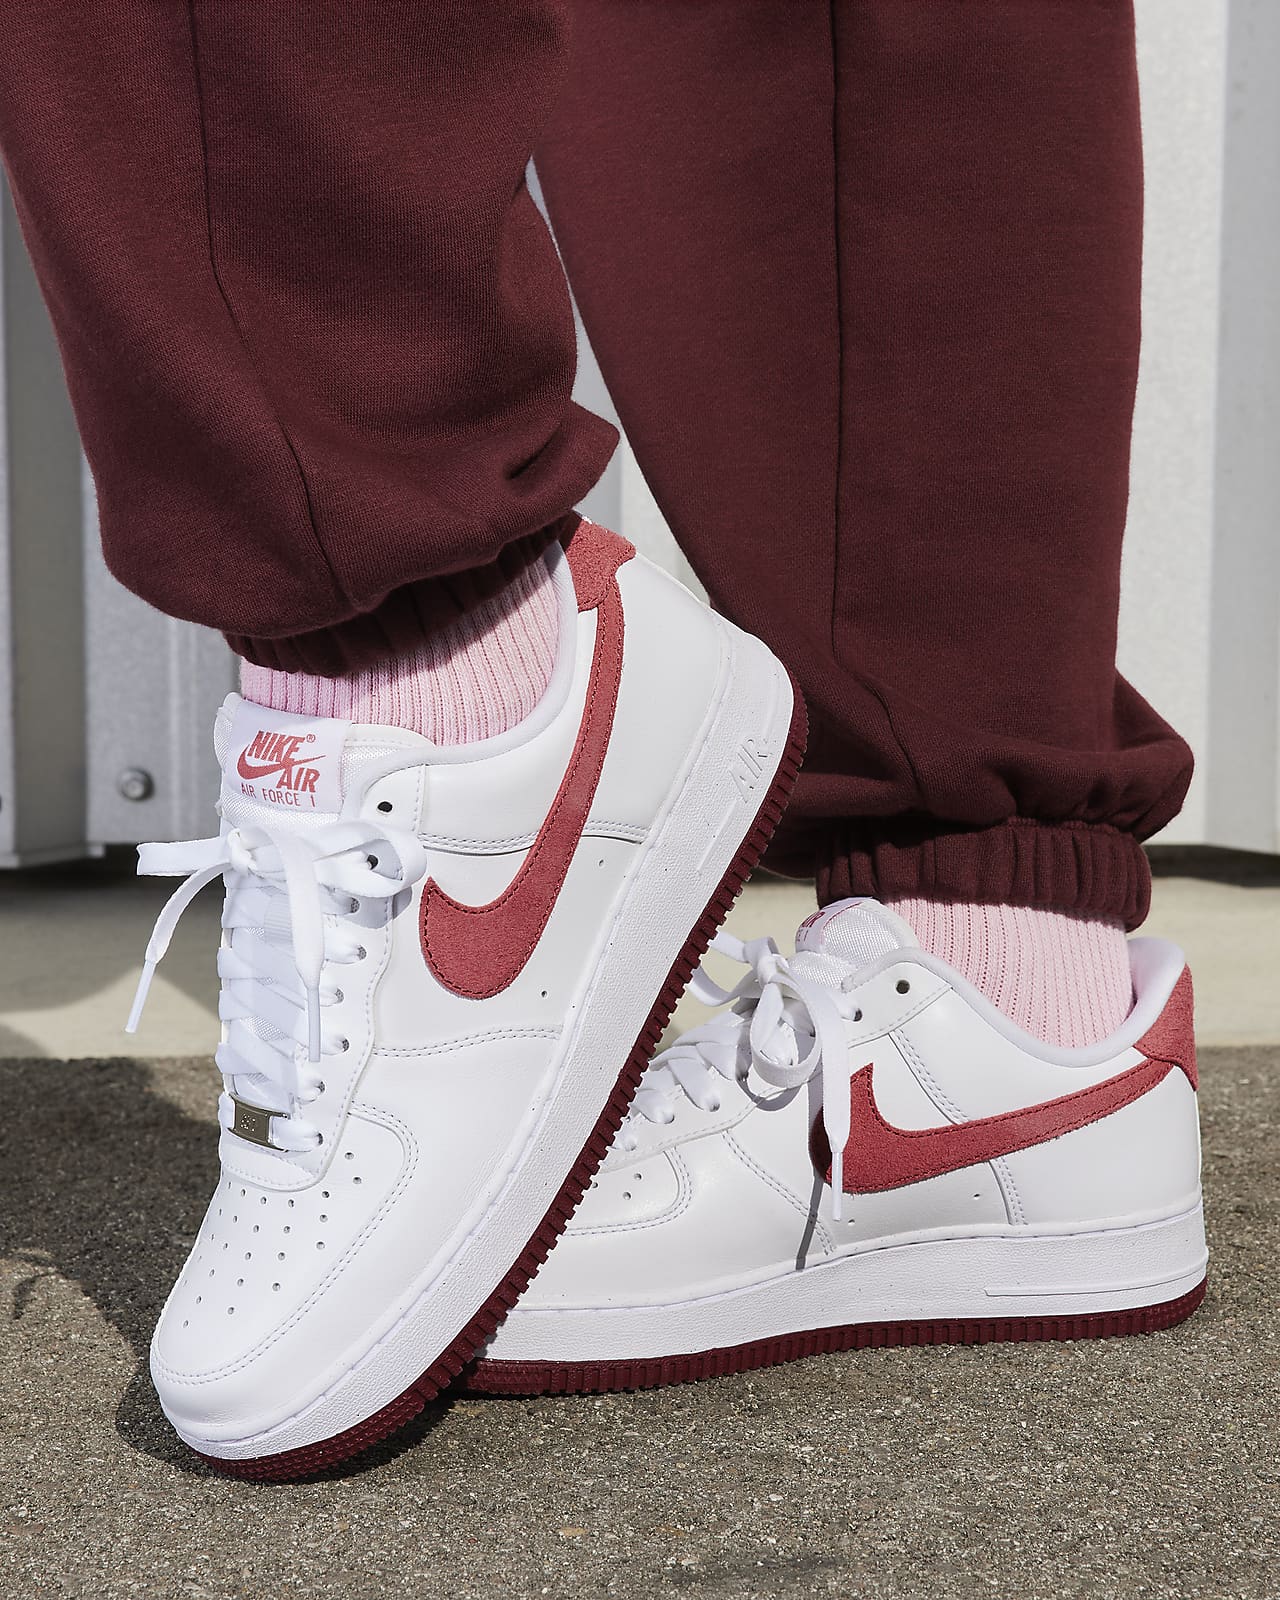 nike air force 1 low 07 womens